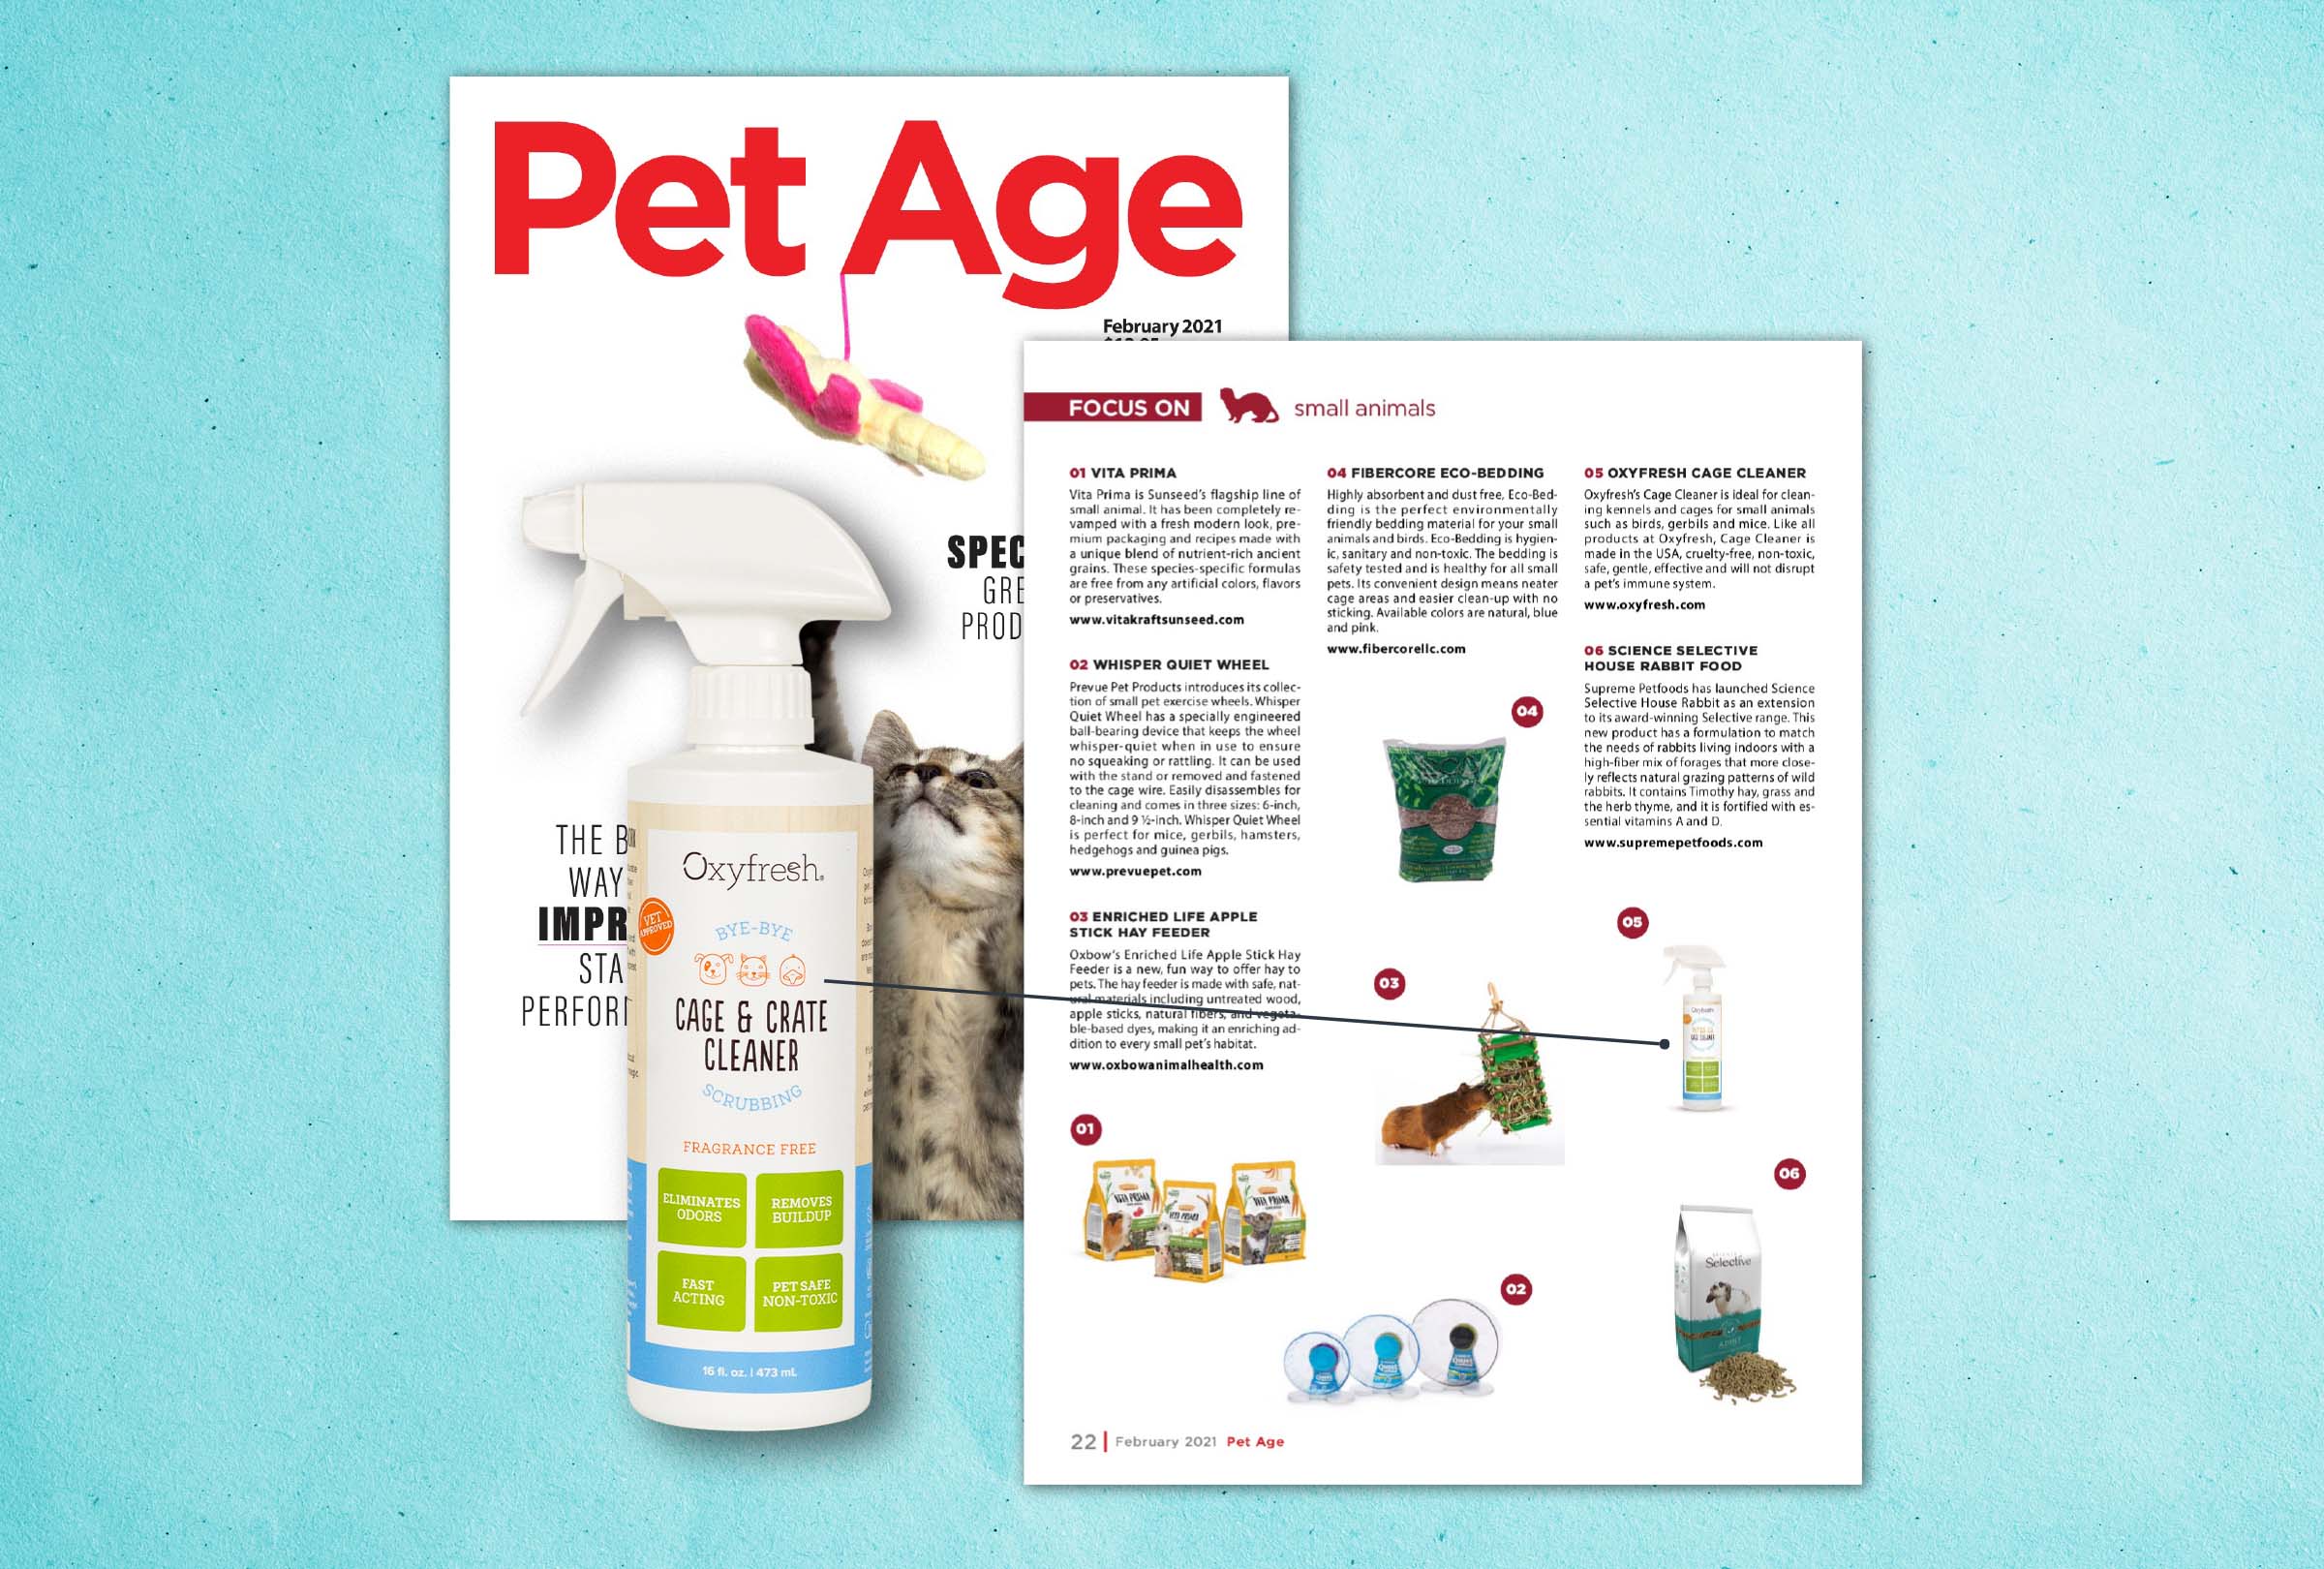 Pet Age Top Picks for Small Animal Odors